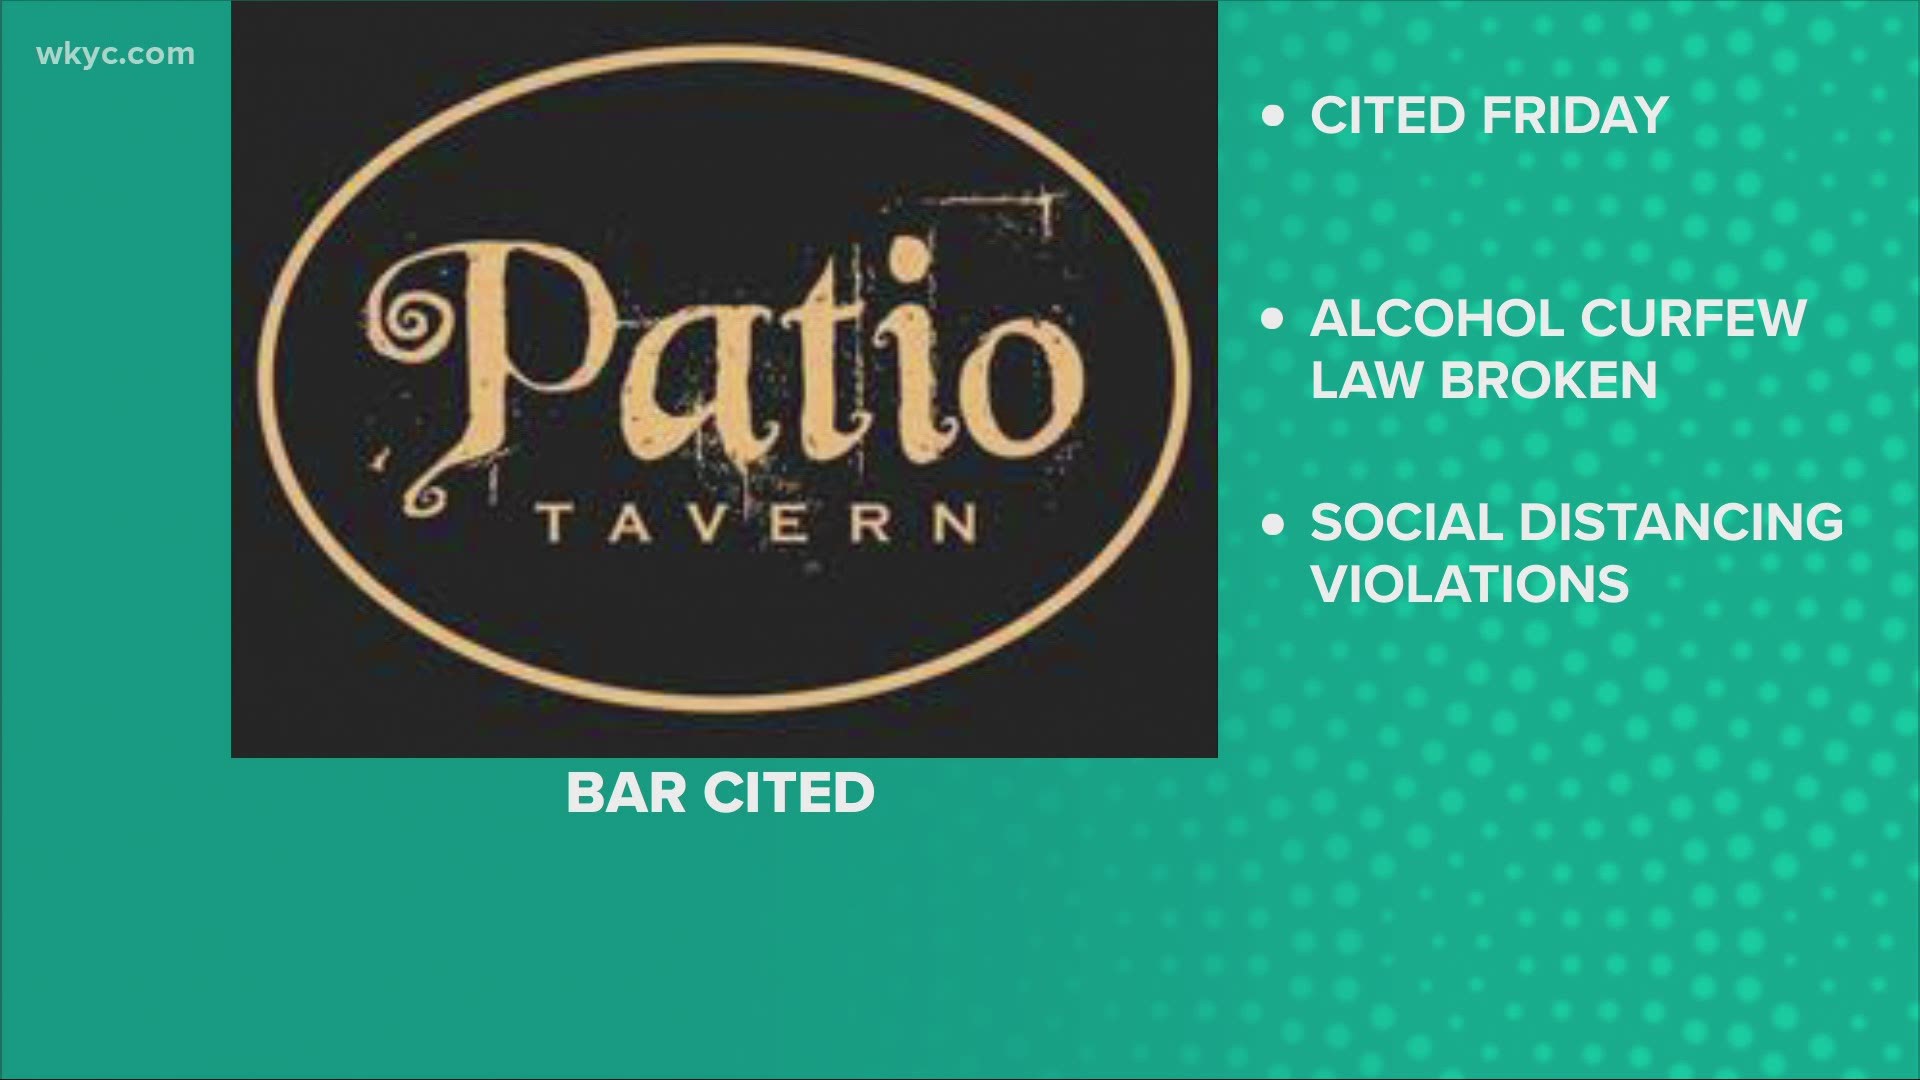 State liquor agents cited Patio Tavern in Lakewood. Bar staff served drinks after 10 p.m. and there was not adequate social distancing.